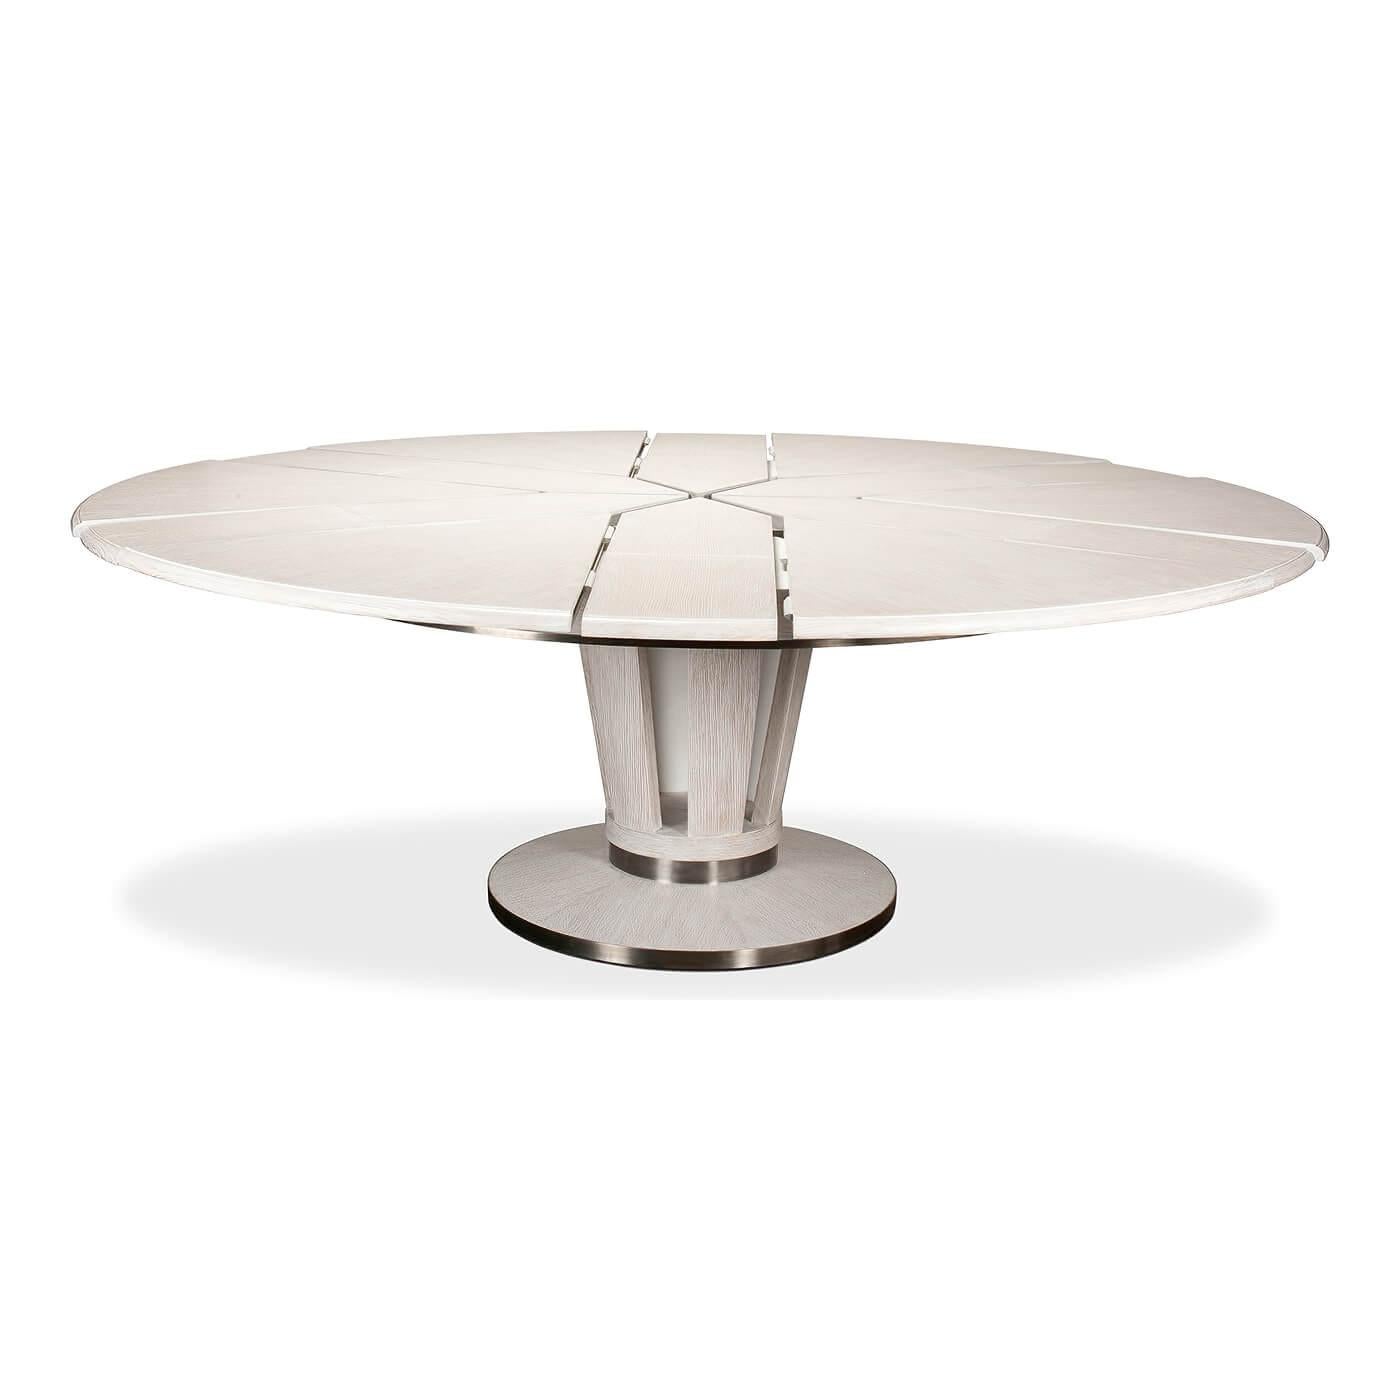 Mid-Century Modern style round extension dining table. The self-storing extension table with a dark oak stained polished top, with antique stainless steel bands to the apron and the openwork circular pedestal base.

Open dimensions: 84